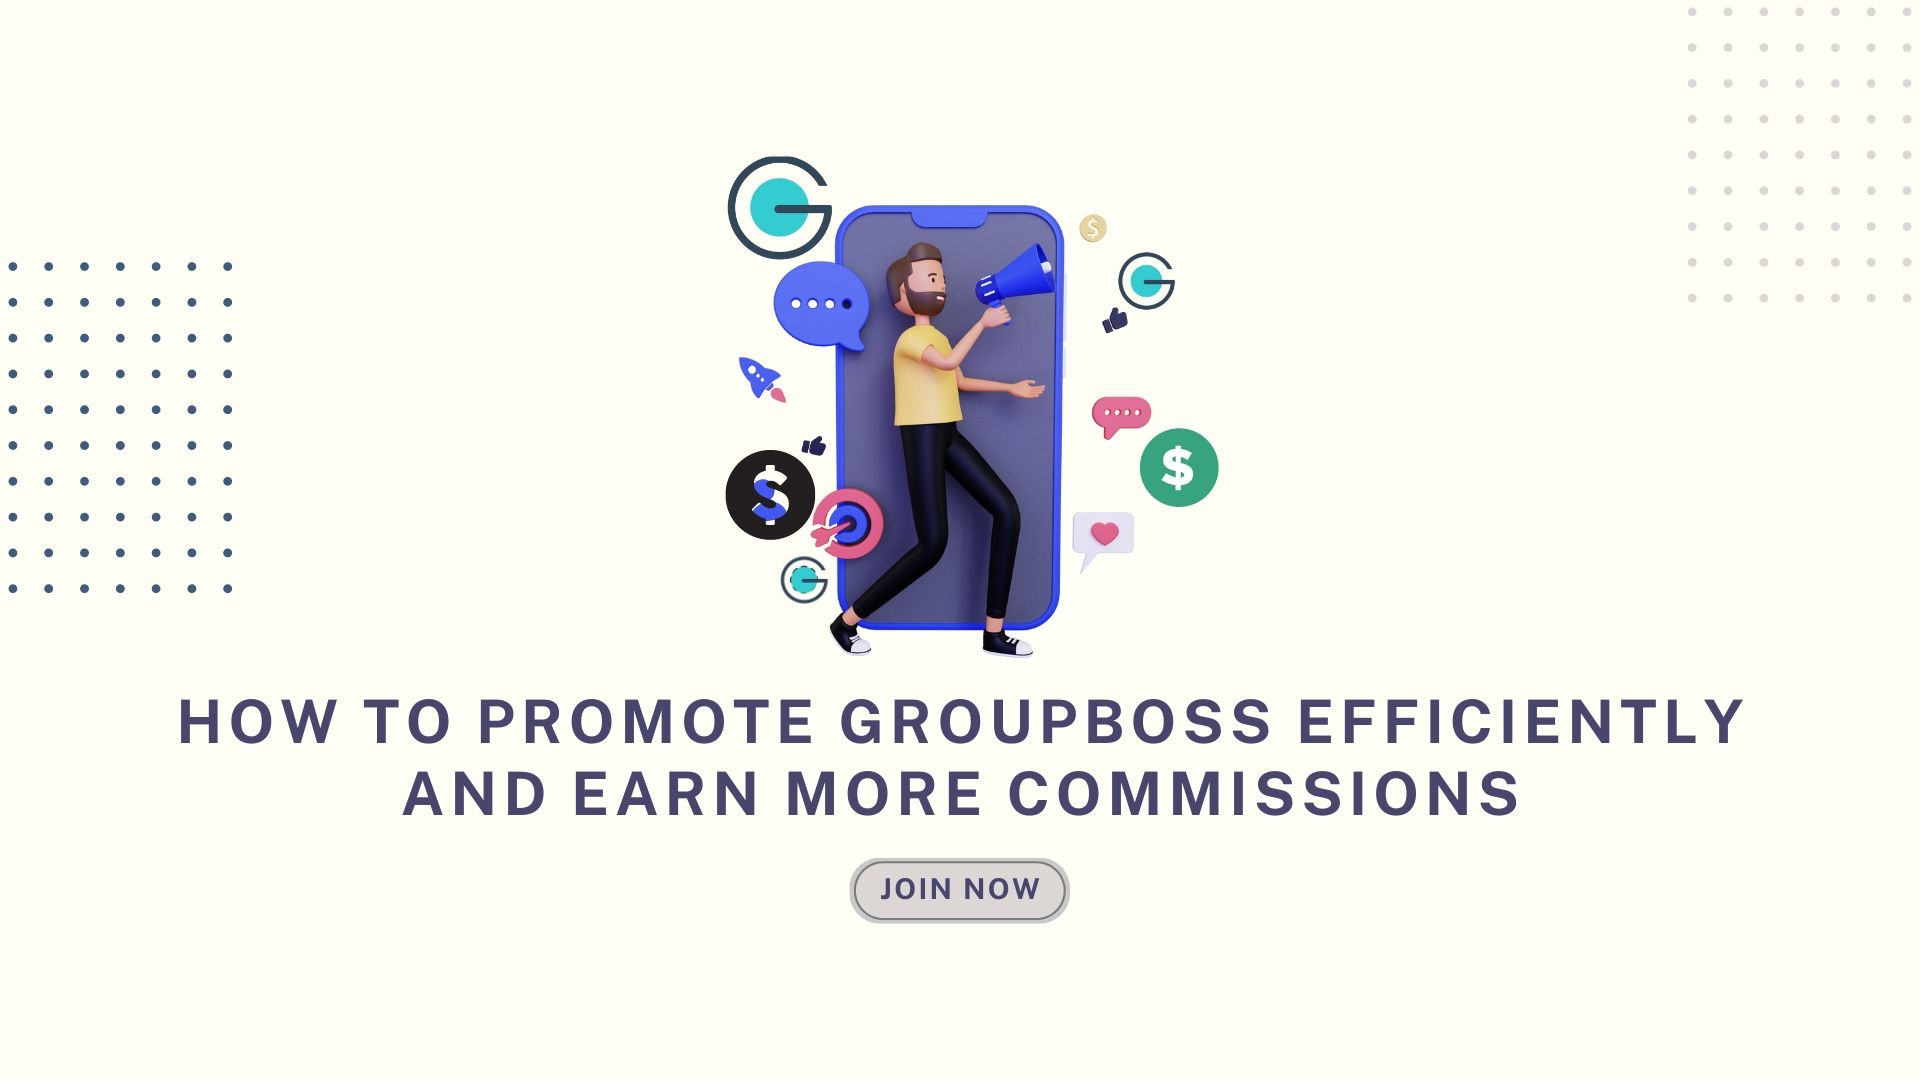 How To Promote Groupboss Efficiently And Earn More Commissions